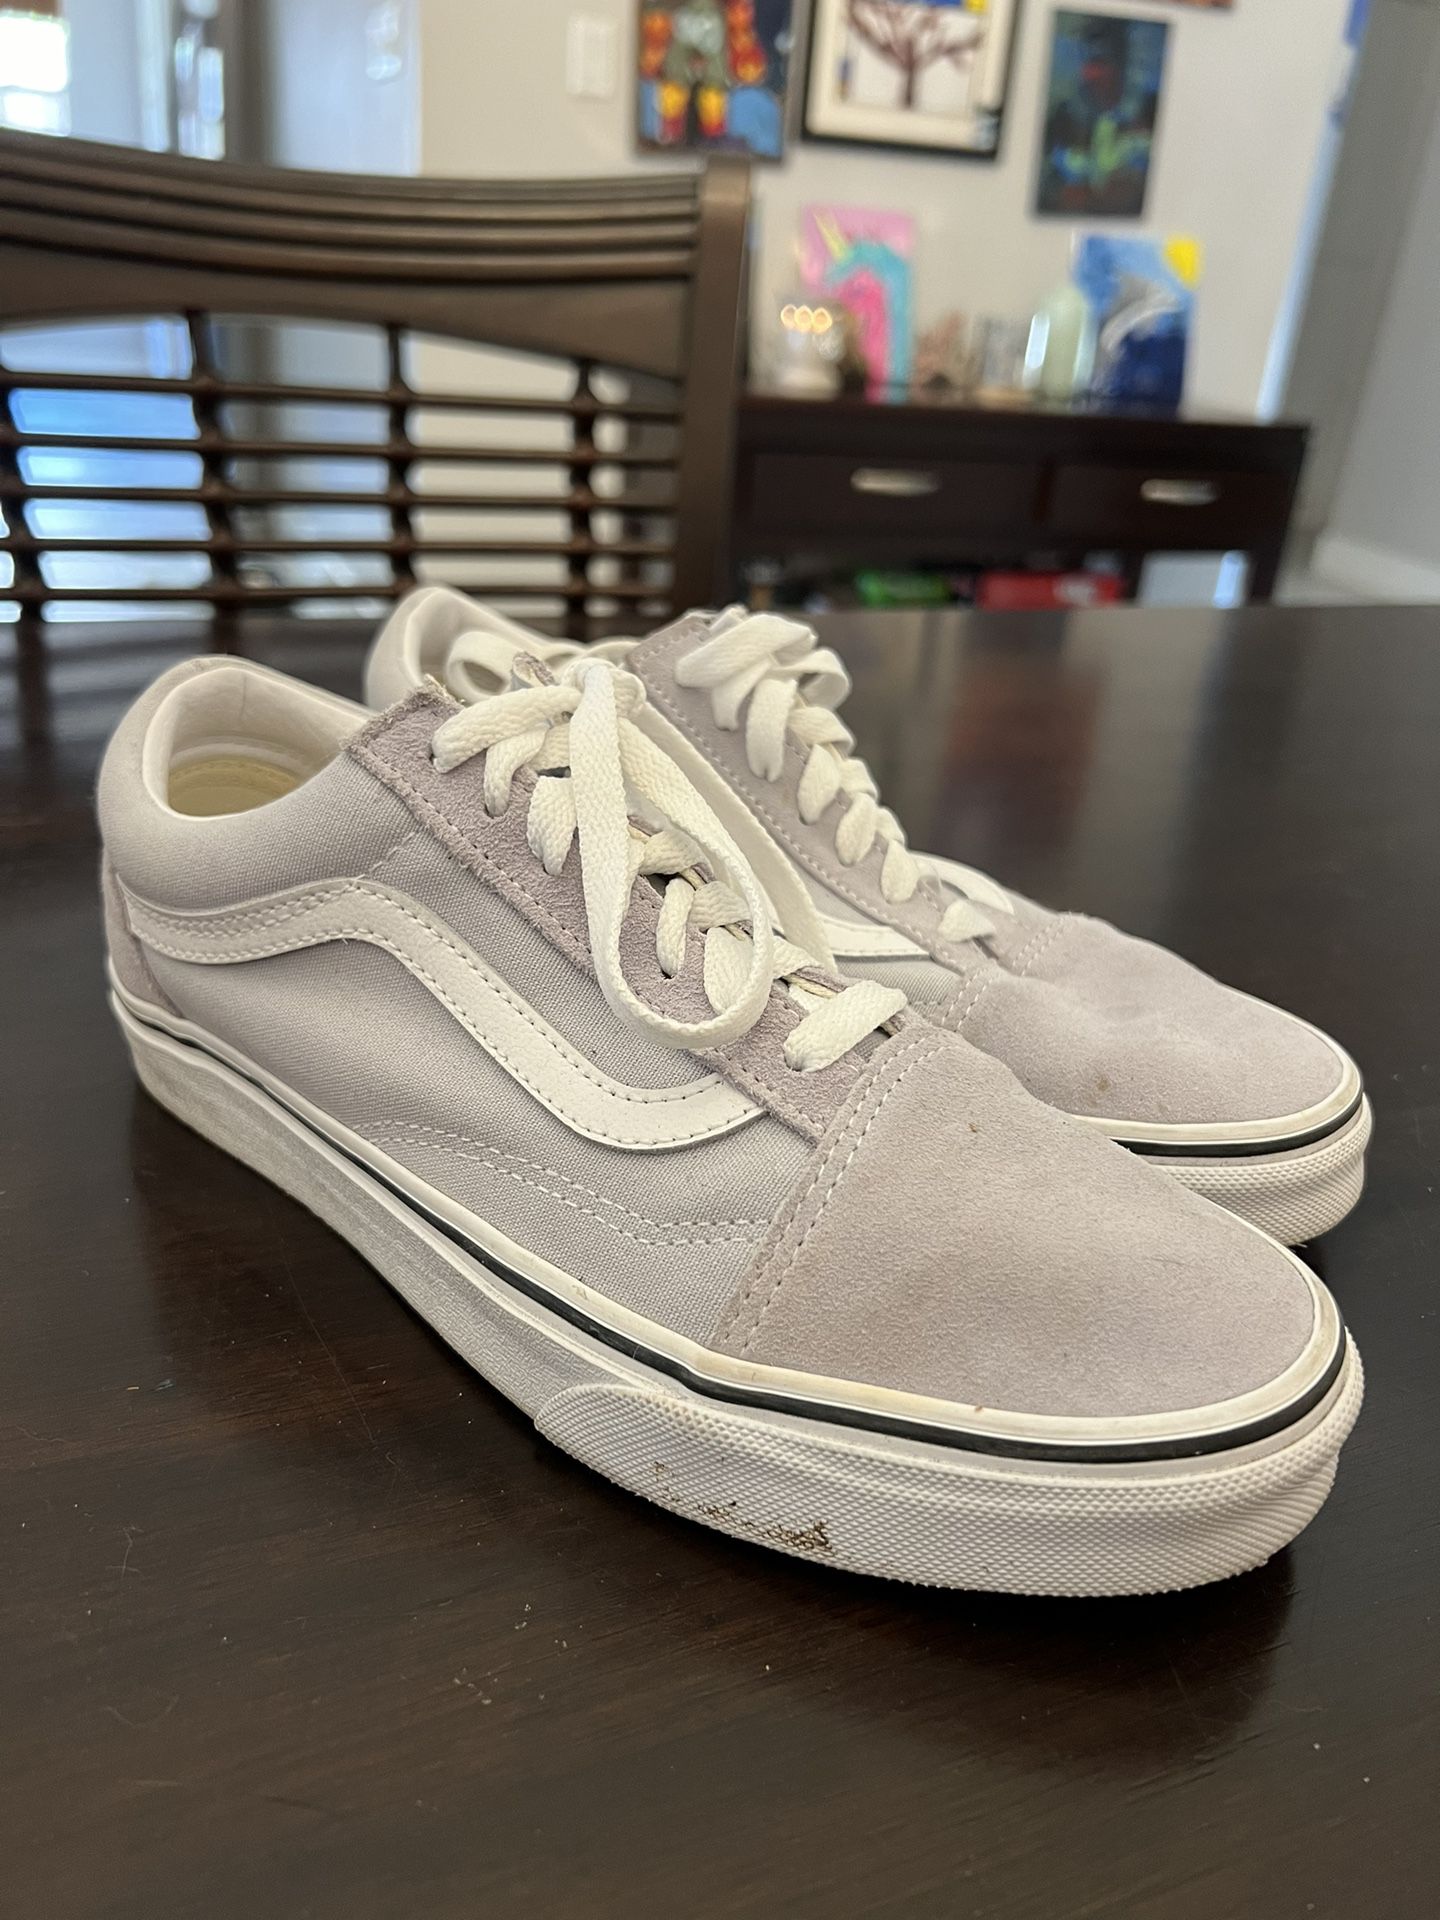 Vans Shoes White And Gray